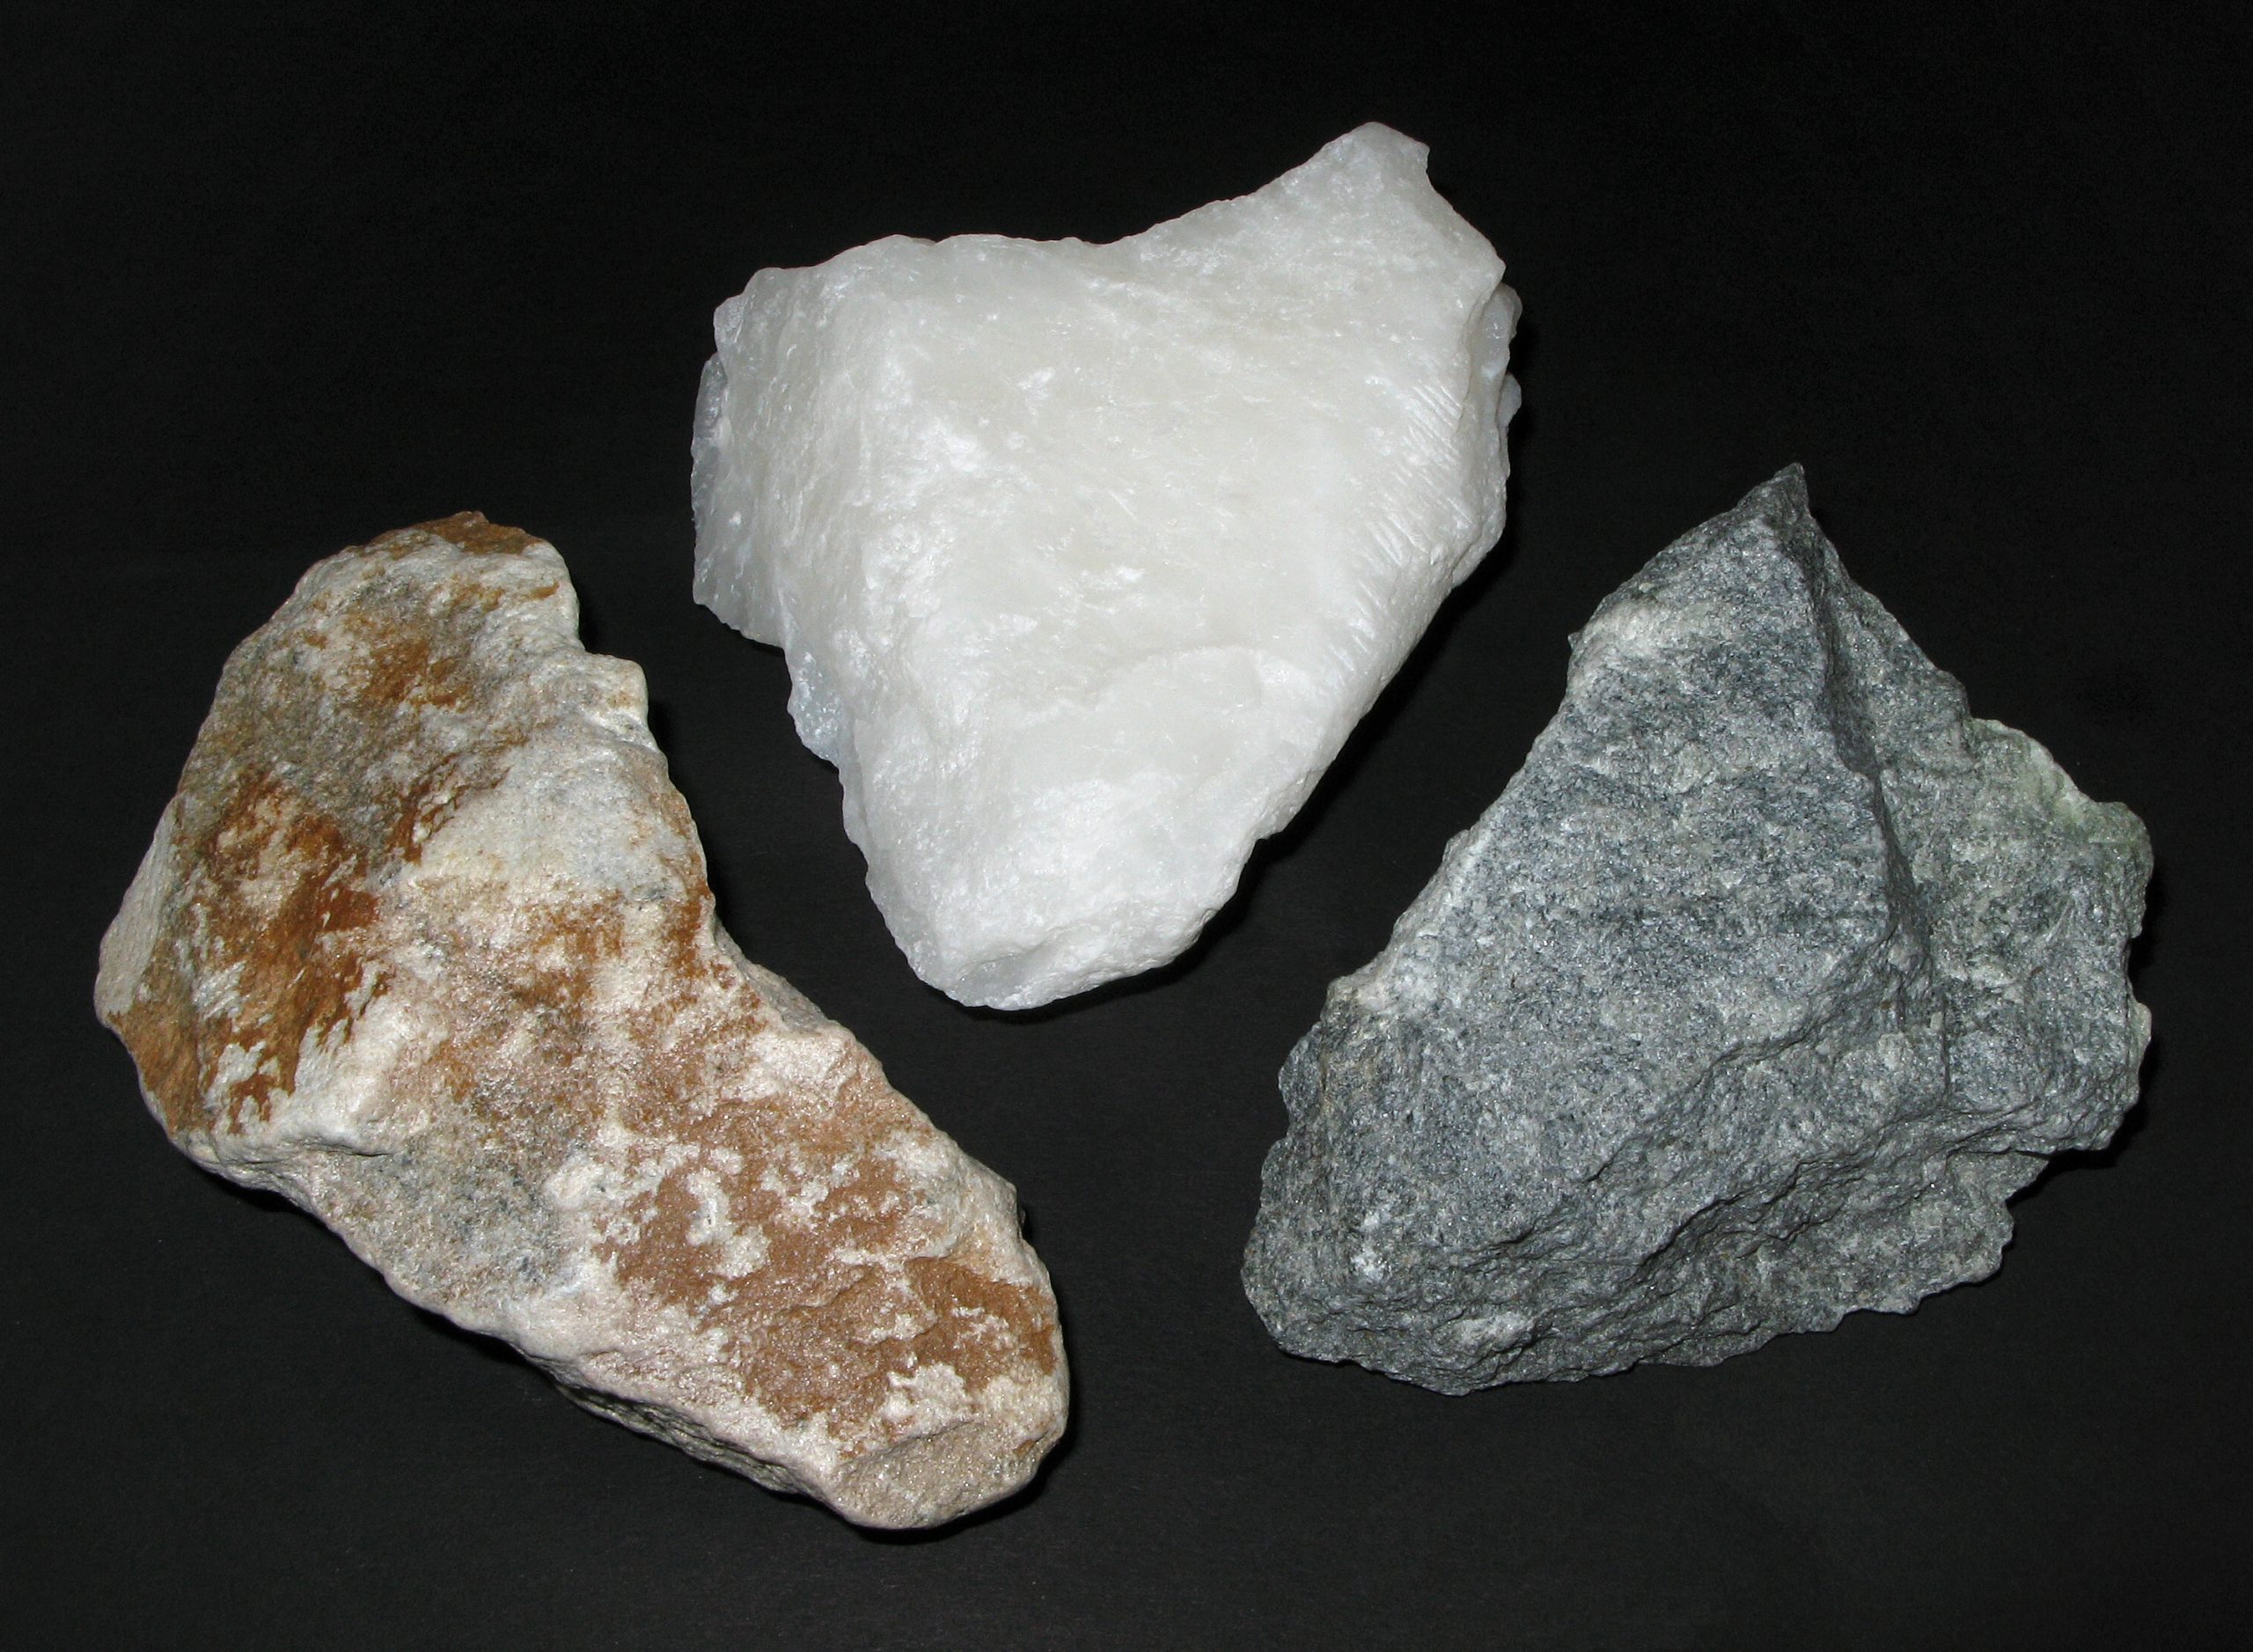 Three stones against a black backdrop are pictured.